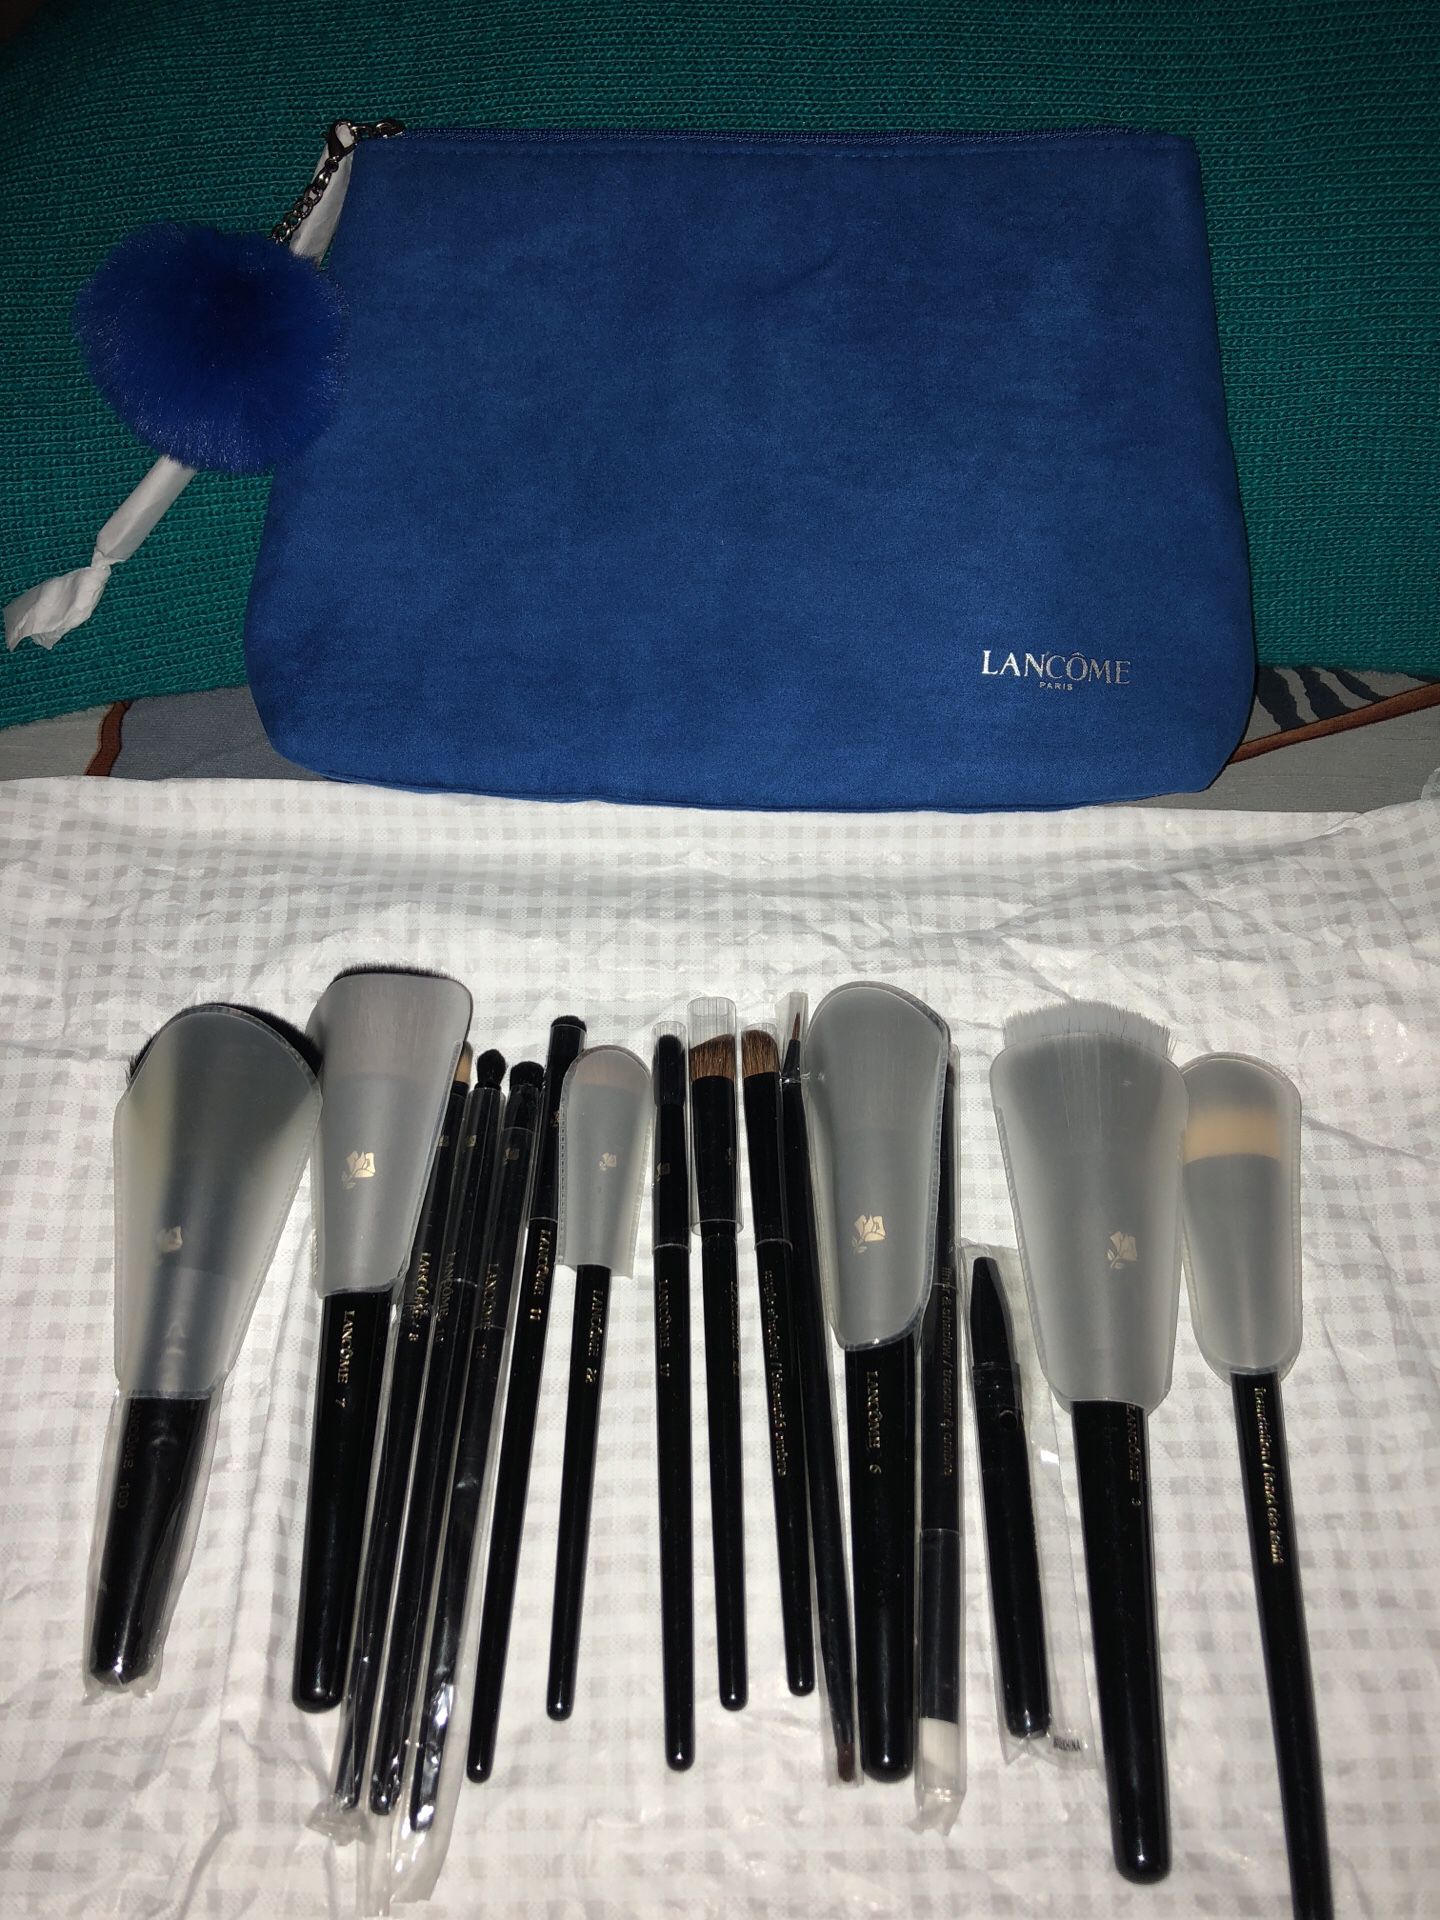 Lancome full make up brush set with pouch